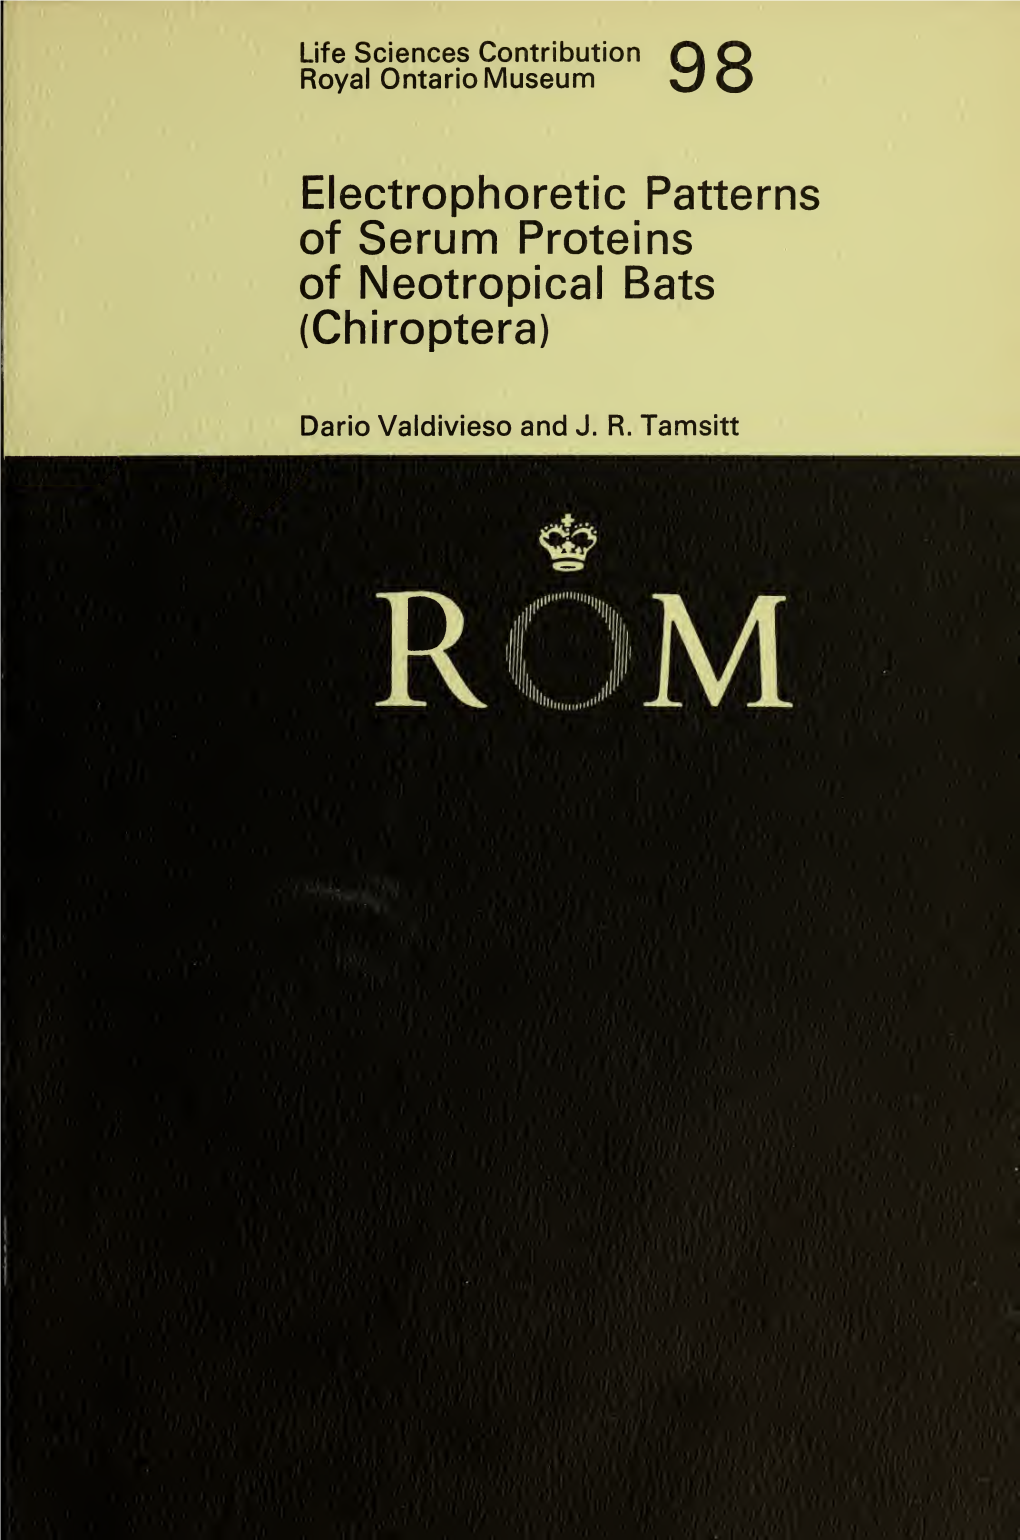 Electrophoretic Patterns of Serum Proteins of Neotropical Bats (Chiroptera)